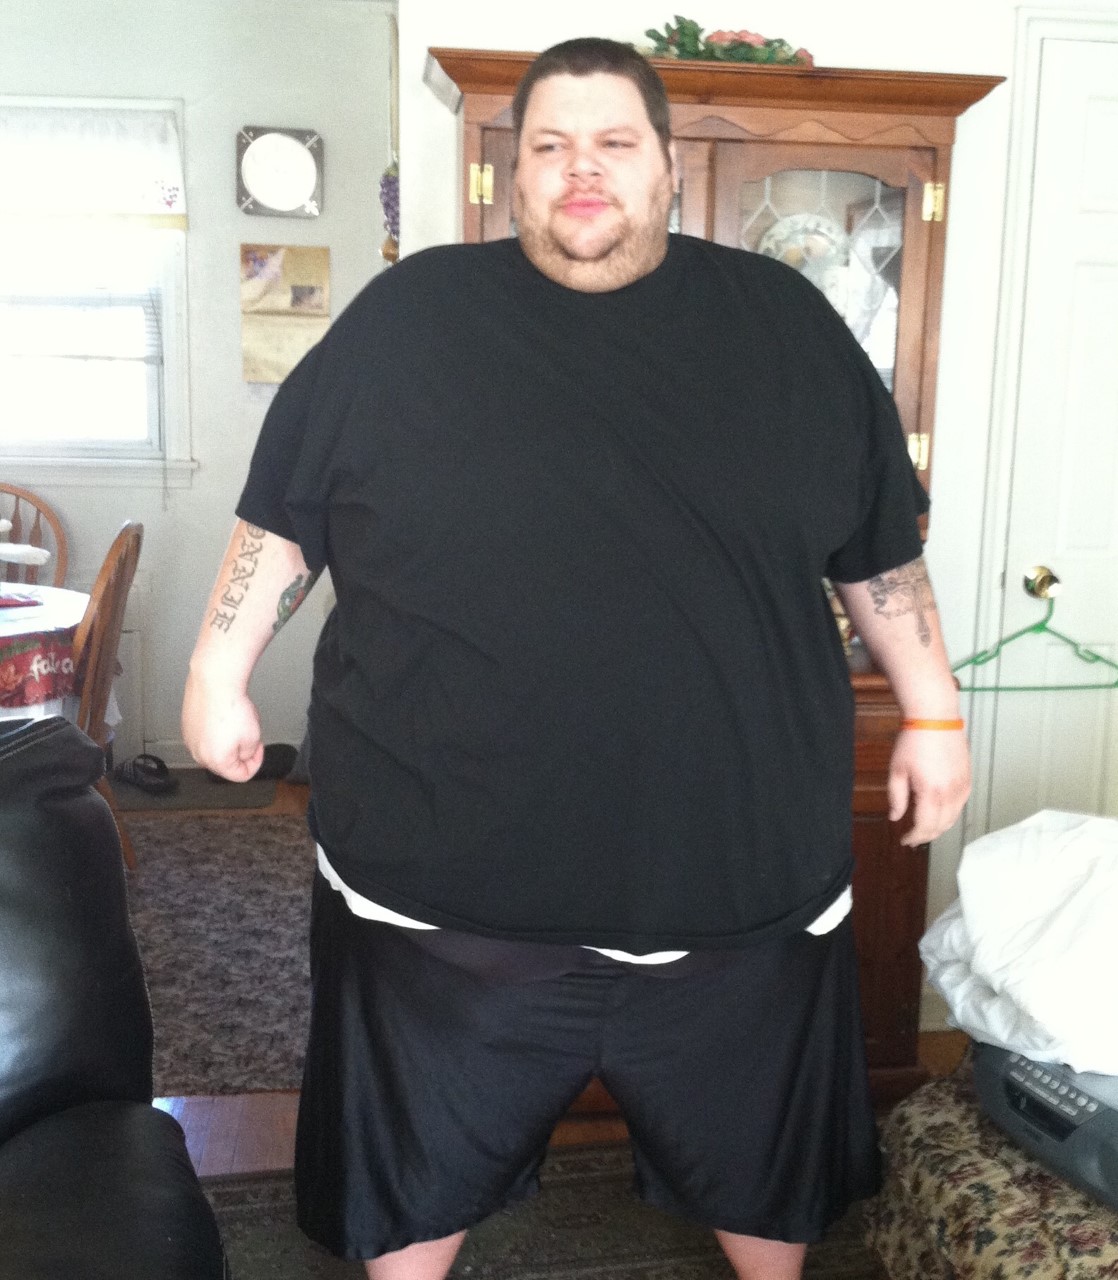 Syracuse Man Loses 450 Pounds And Gains A New Life